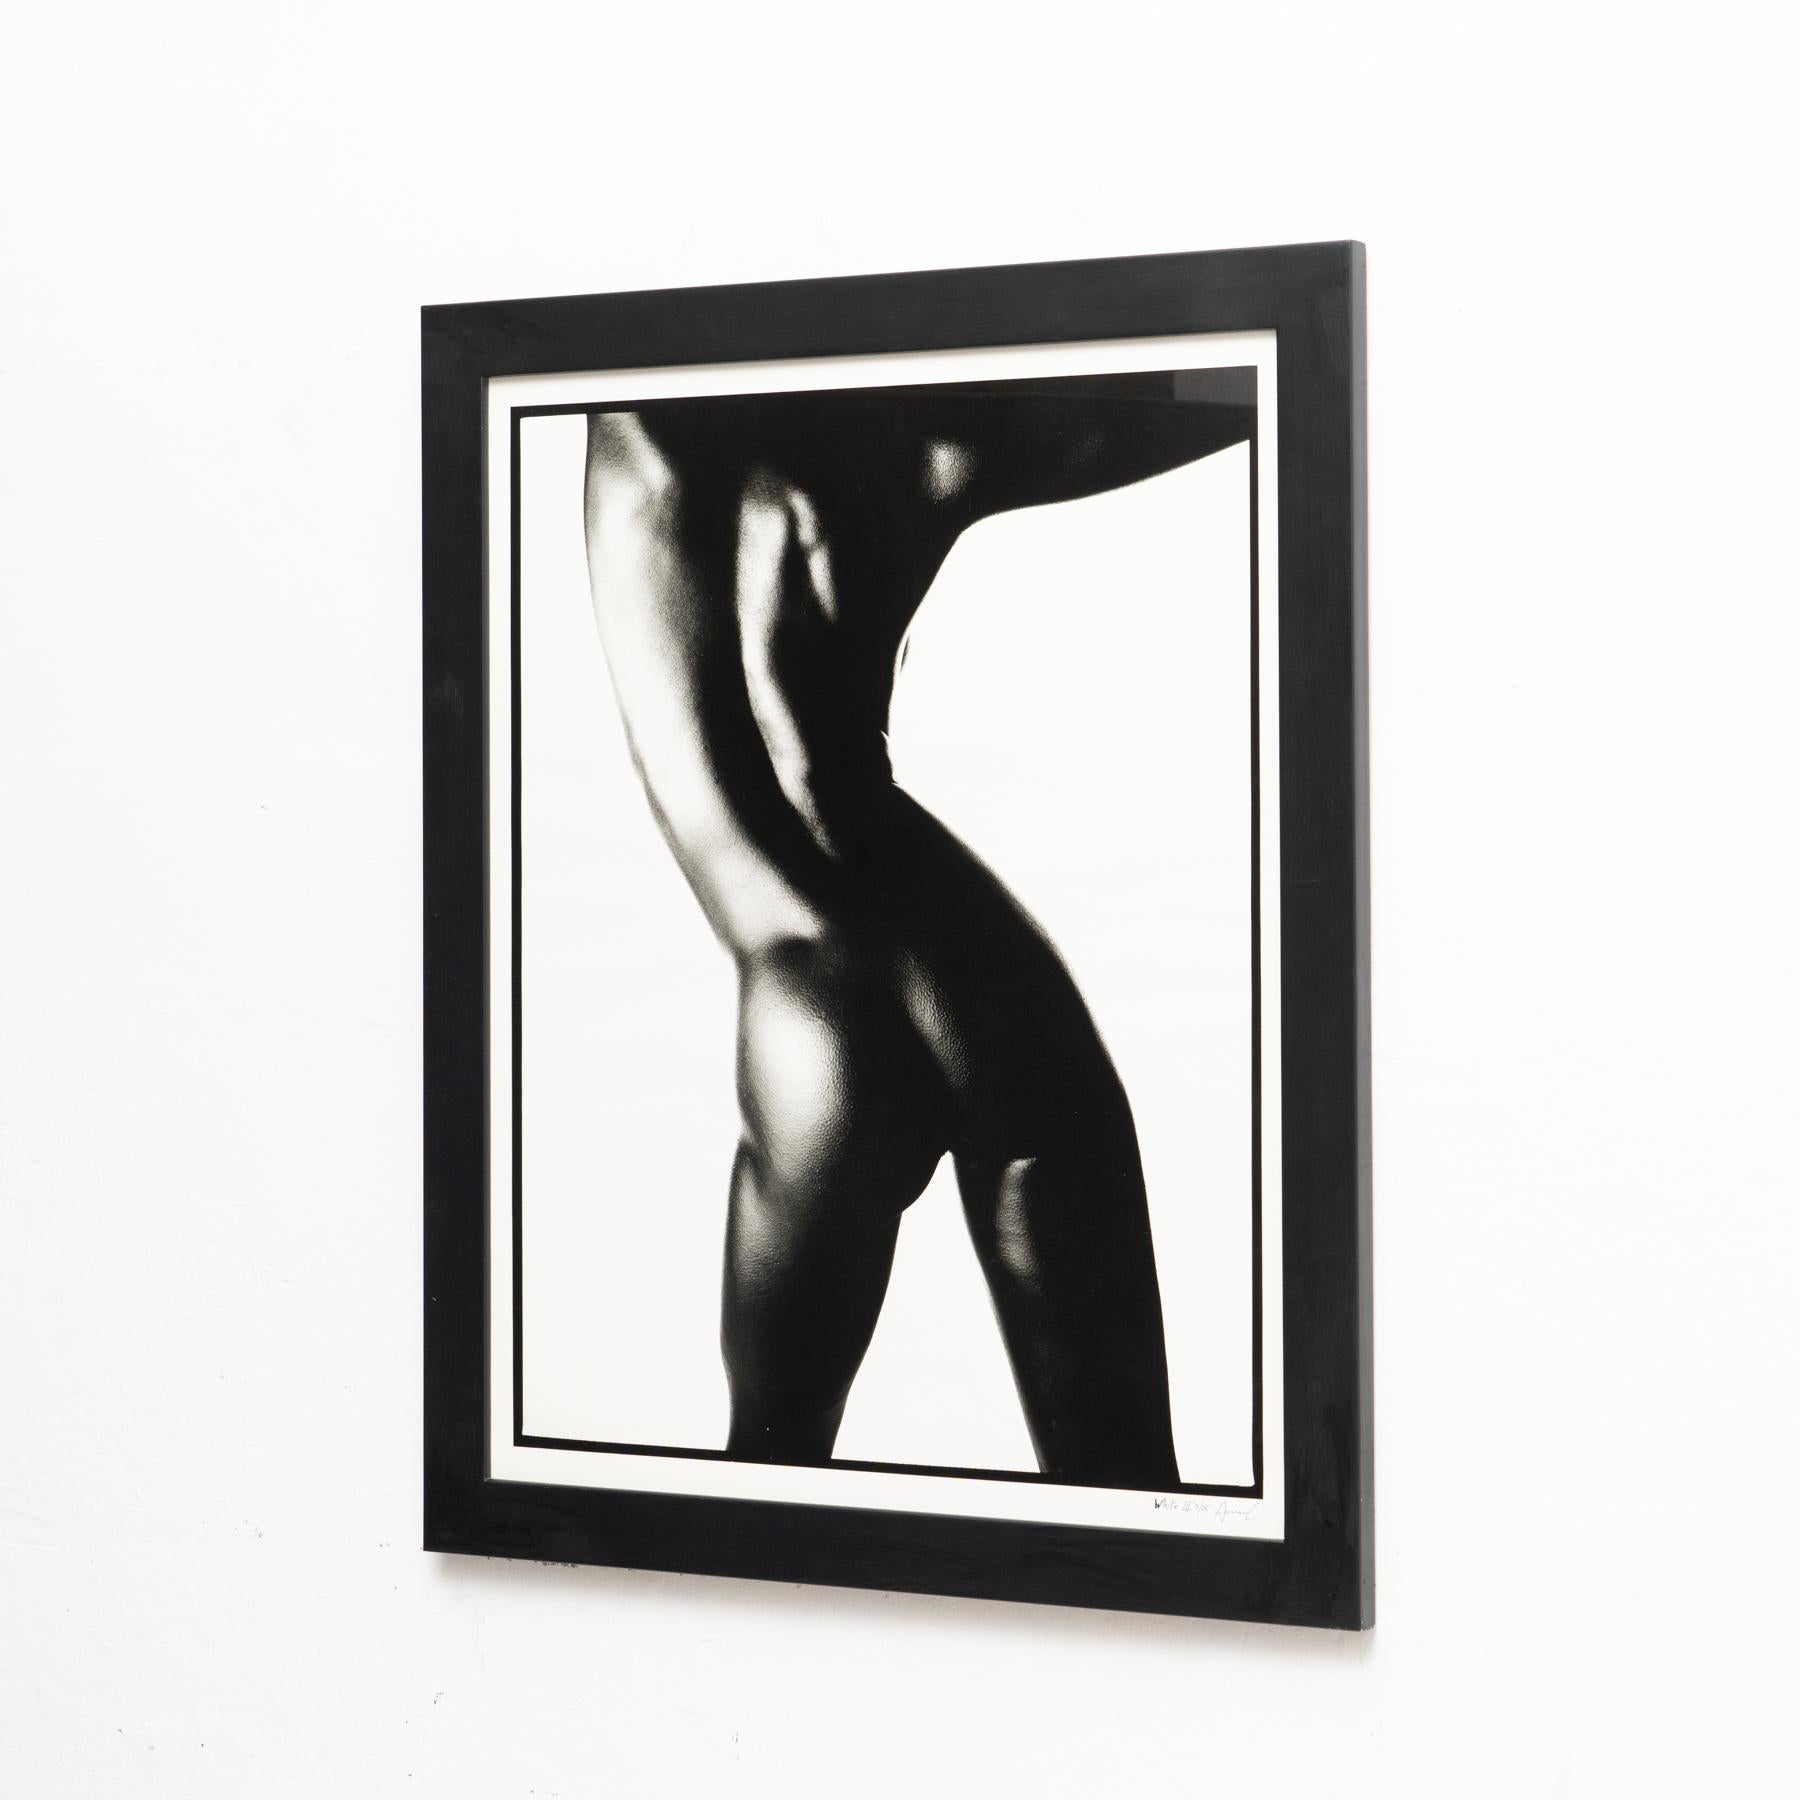 Spanish Miquel Arnal Contemporary Photography For Sale